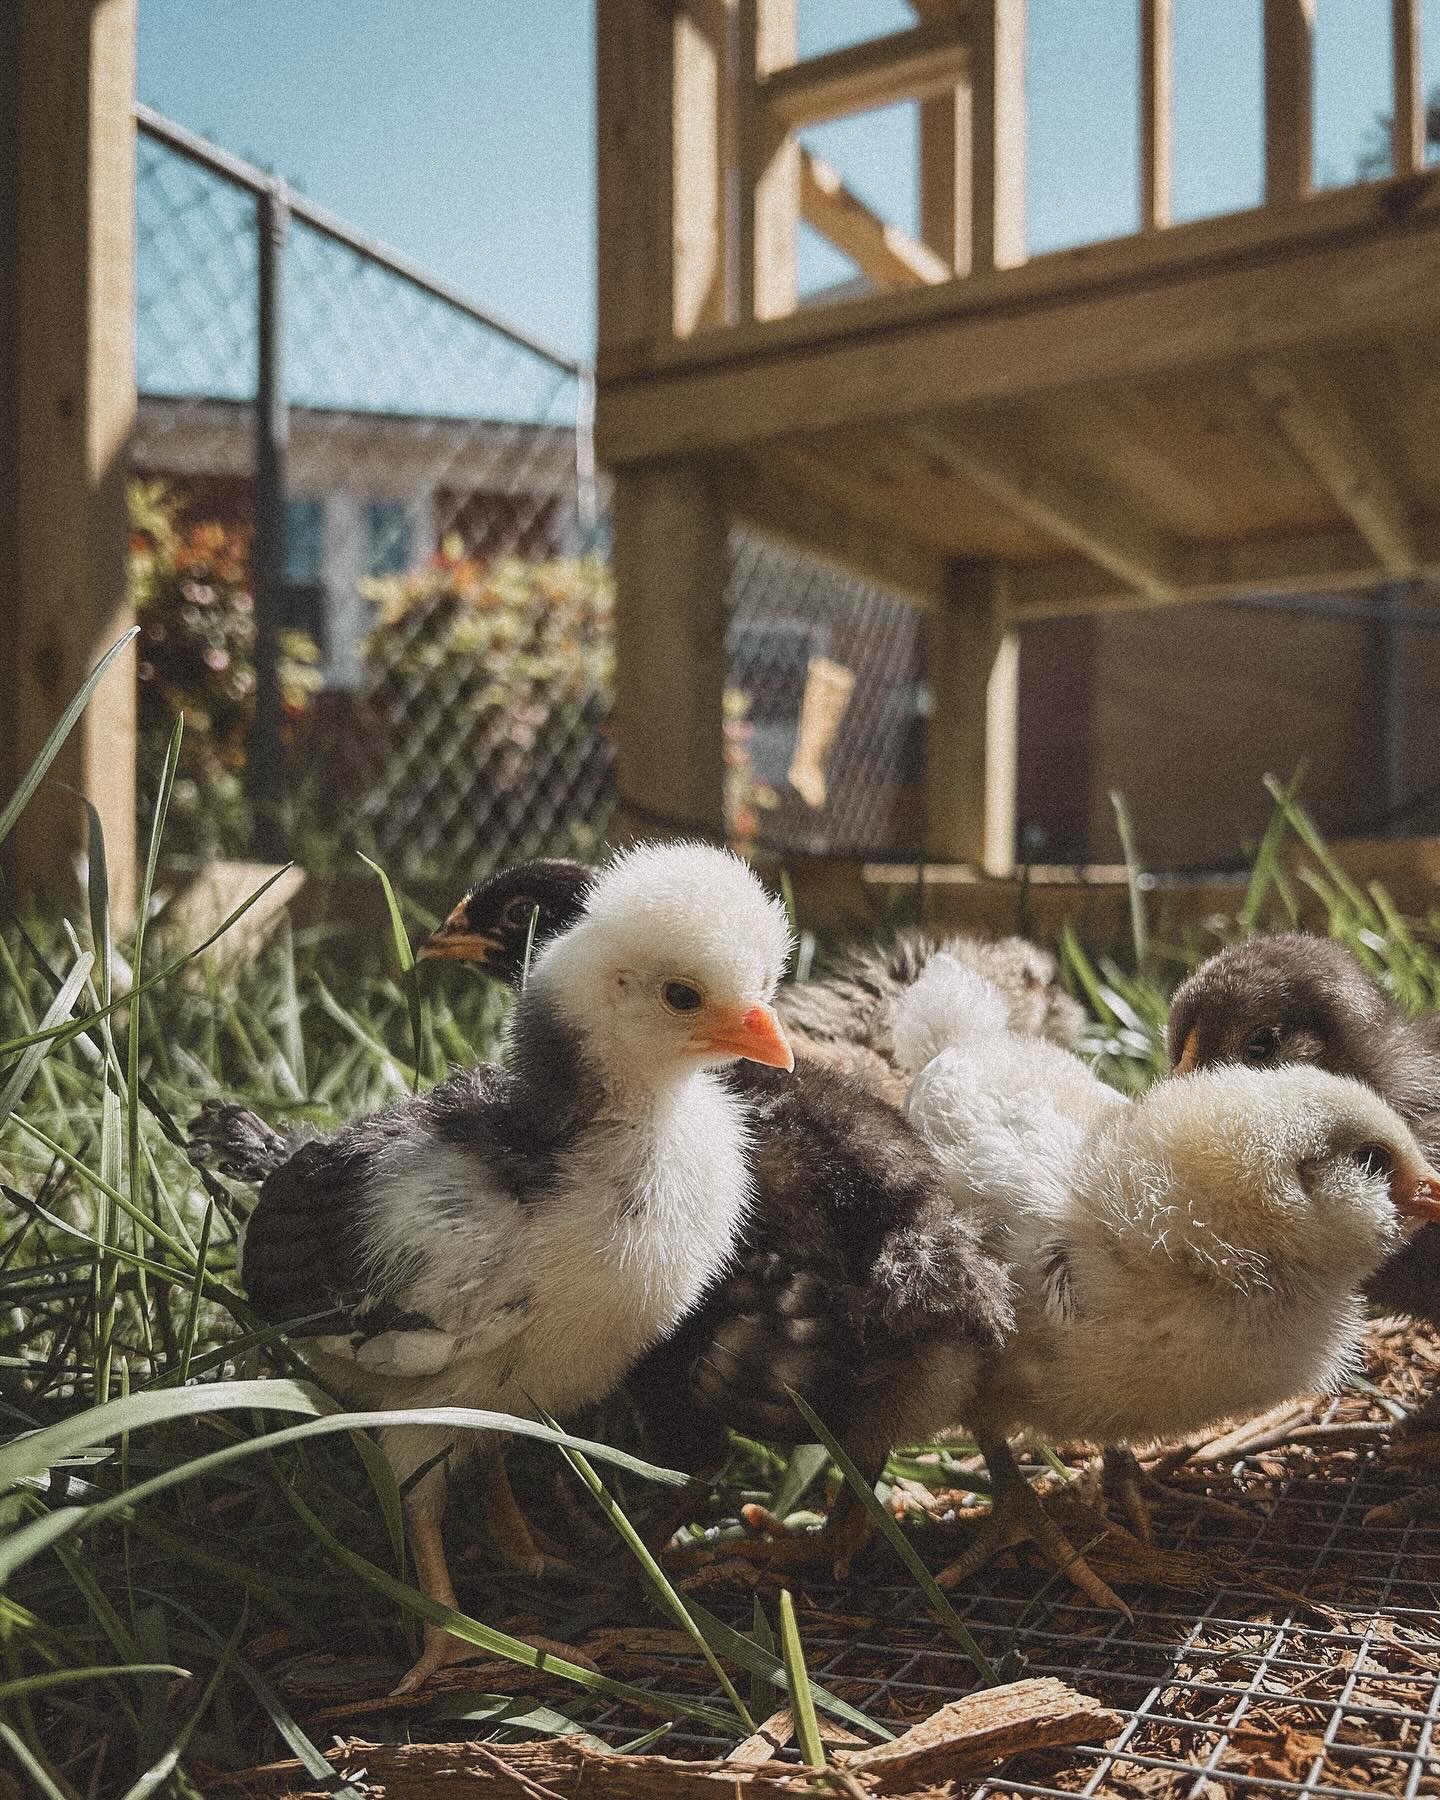 Babies first day out 🥰🐣 They loved the sunshine. As for me, I worried the whole time about predators lol 

Does it get any cuter though?! 🐣 

#GreenvilleGram #GreenvilleCommunity #UpstateProud #GreenvilleGrows #yeahthatgreenville&nbsp;#yeahthatgre